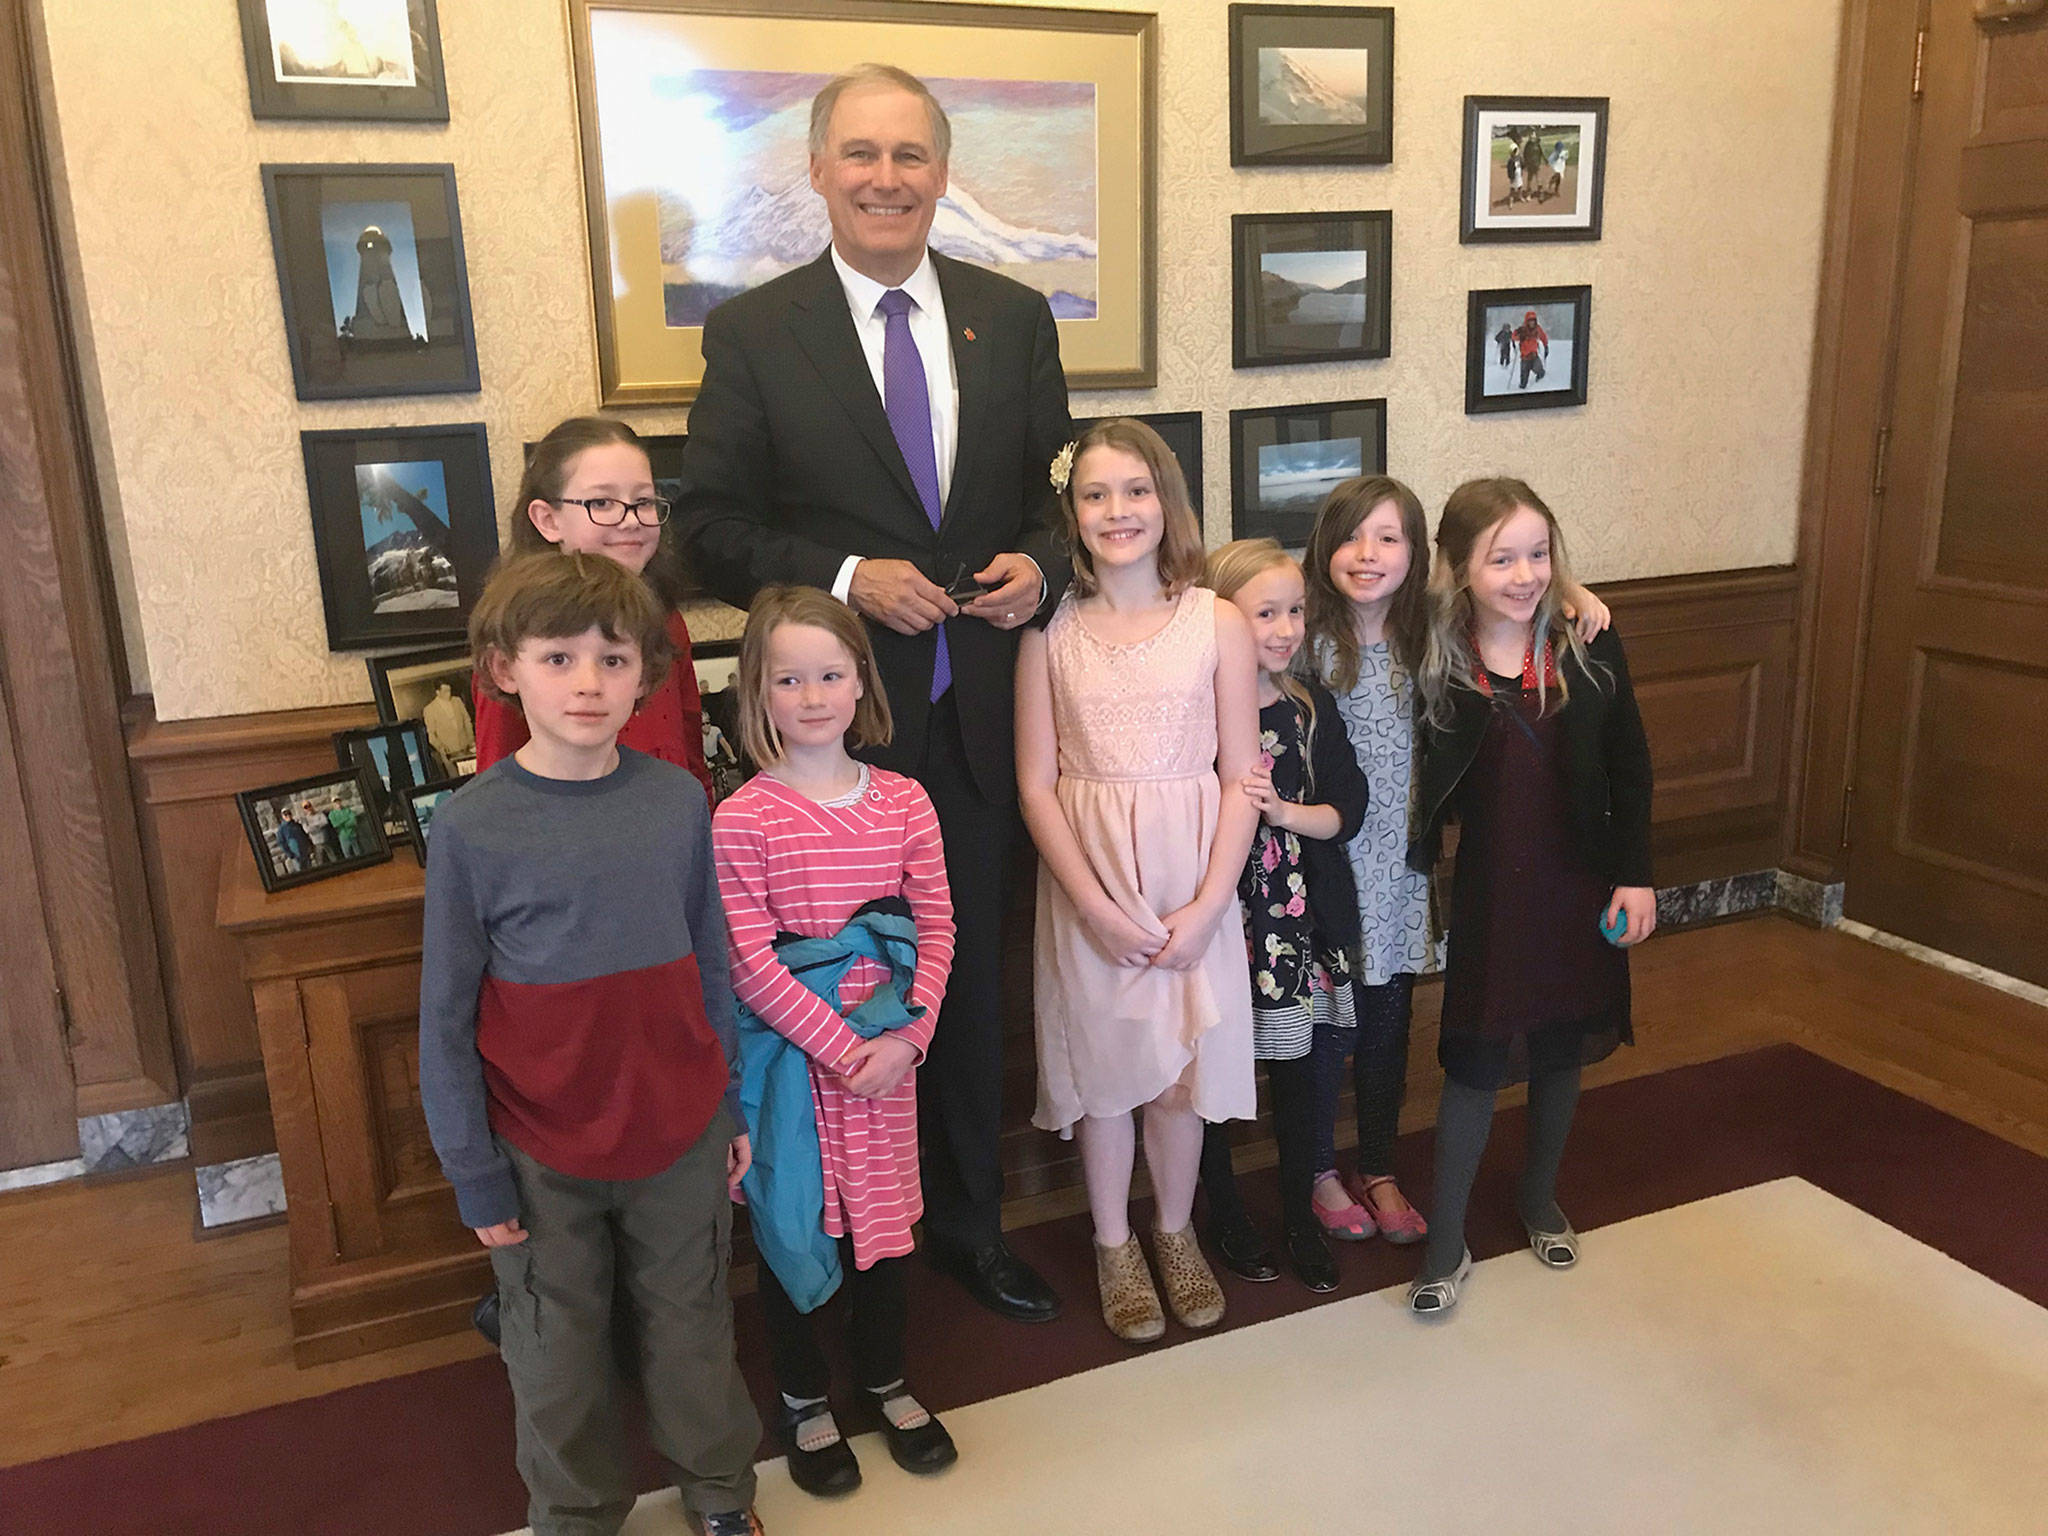 Local students Finn, Nora, Margaret, Lucia, Kaileigh, Megan and Becky meet with Gov. Jay Inslee, after some of them started a campaign to ban plastic bags. Photo courtesy of Angela Pifer